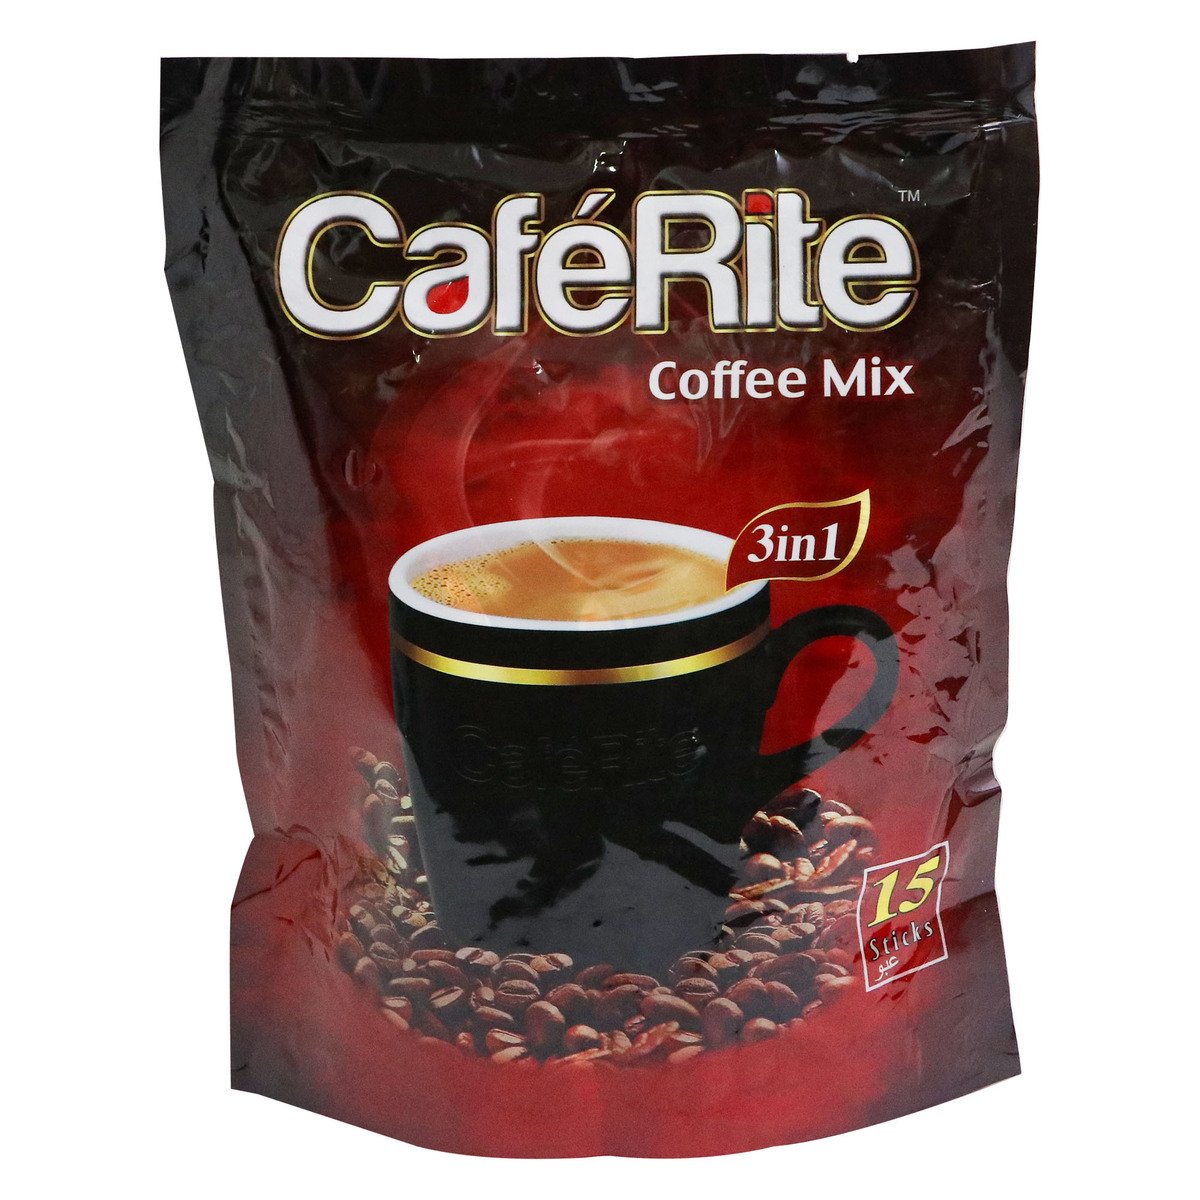 Cafe Rite 3in1 Coffee Mix 15 x 15g